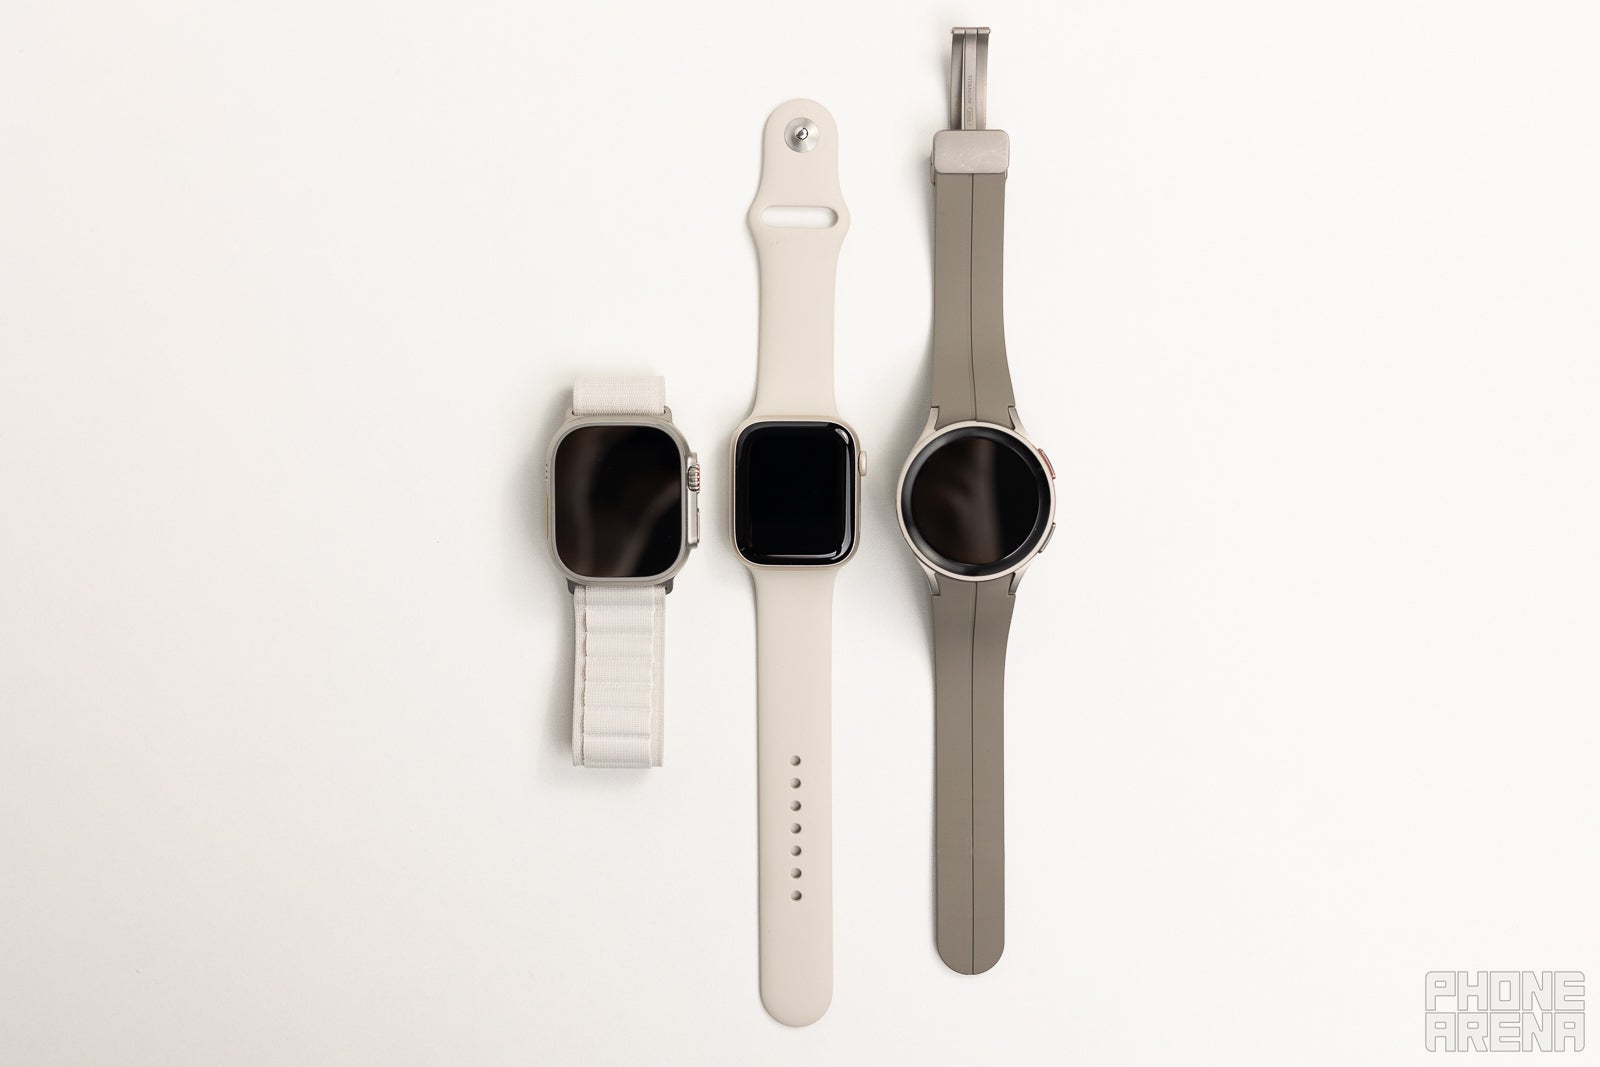 Apple Watch Ultra vs Apple Watch Series 8 vs Samsung Galaxy Watch 5 Pro size comparison with bands on - Apple Watch Ultra size comparison